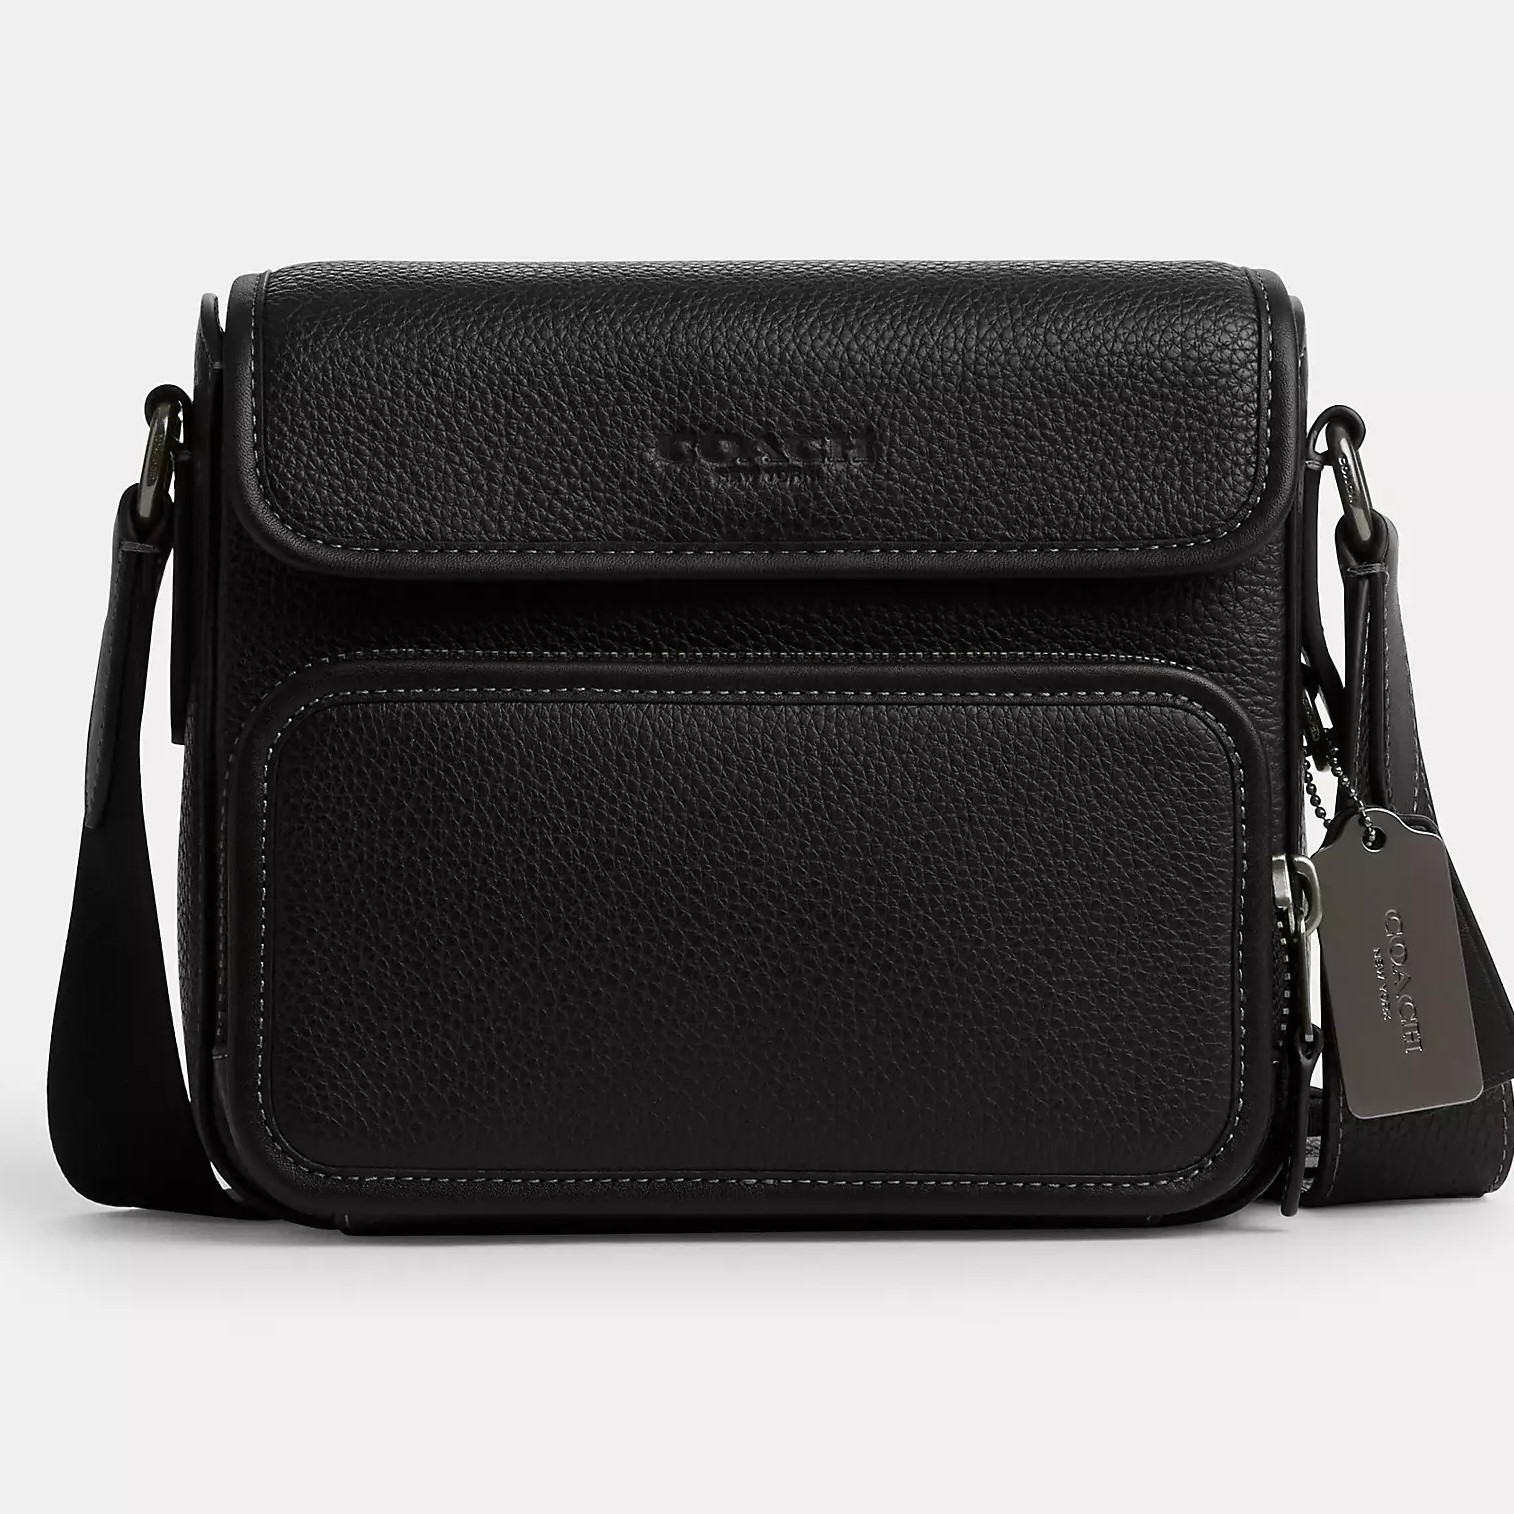 TÚI ĐEO CHÉO COACH NAM SULLIVAN FLAP CROSSBODY IN BLACK REFINED PEBBLE LEATHER AND SMOOTH CALF LEATHER CN729 3